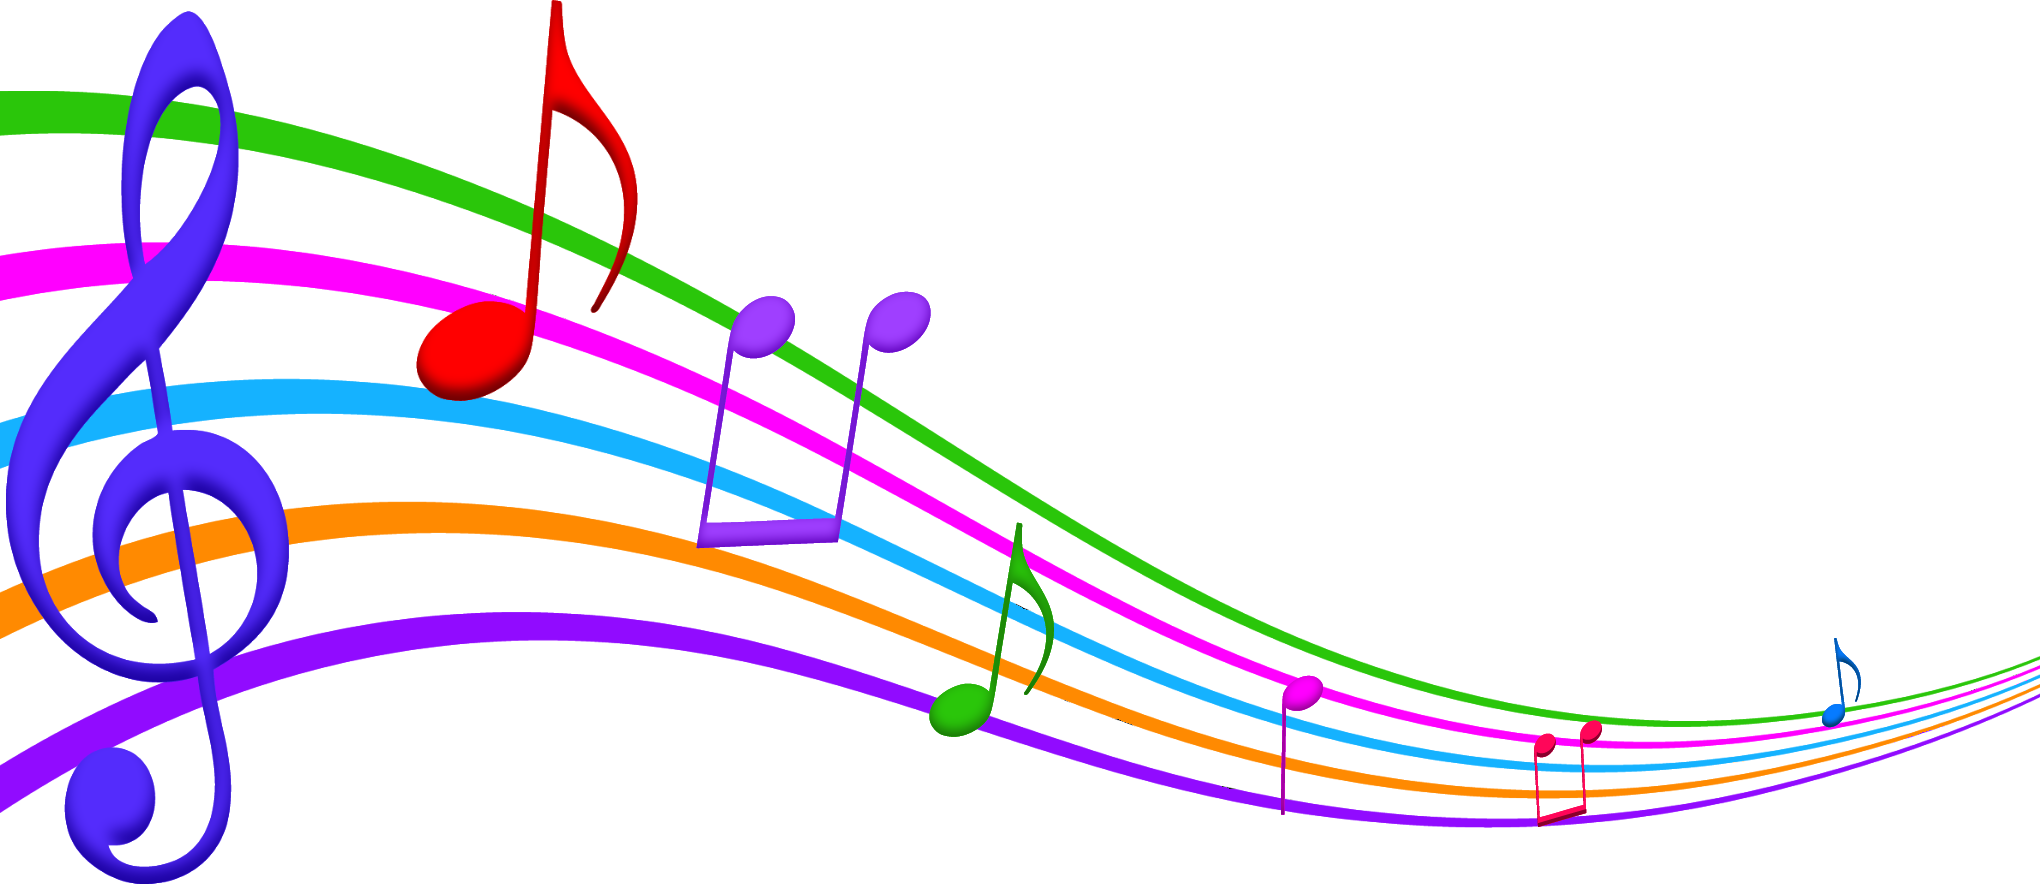 Colored Music Notes Clipart - Cliparts and Others Art Inspiration